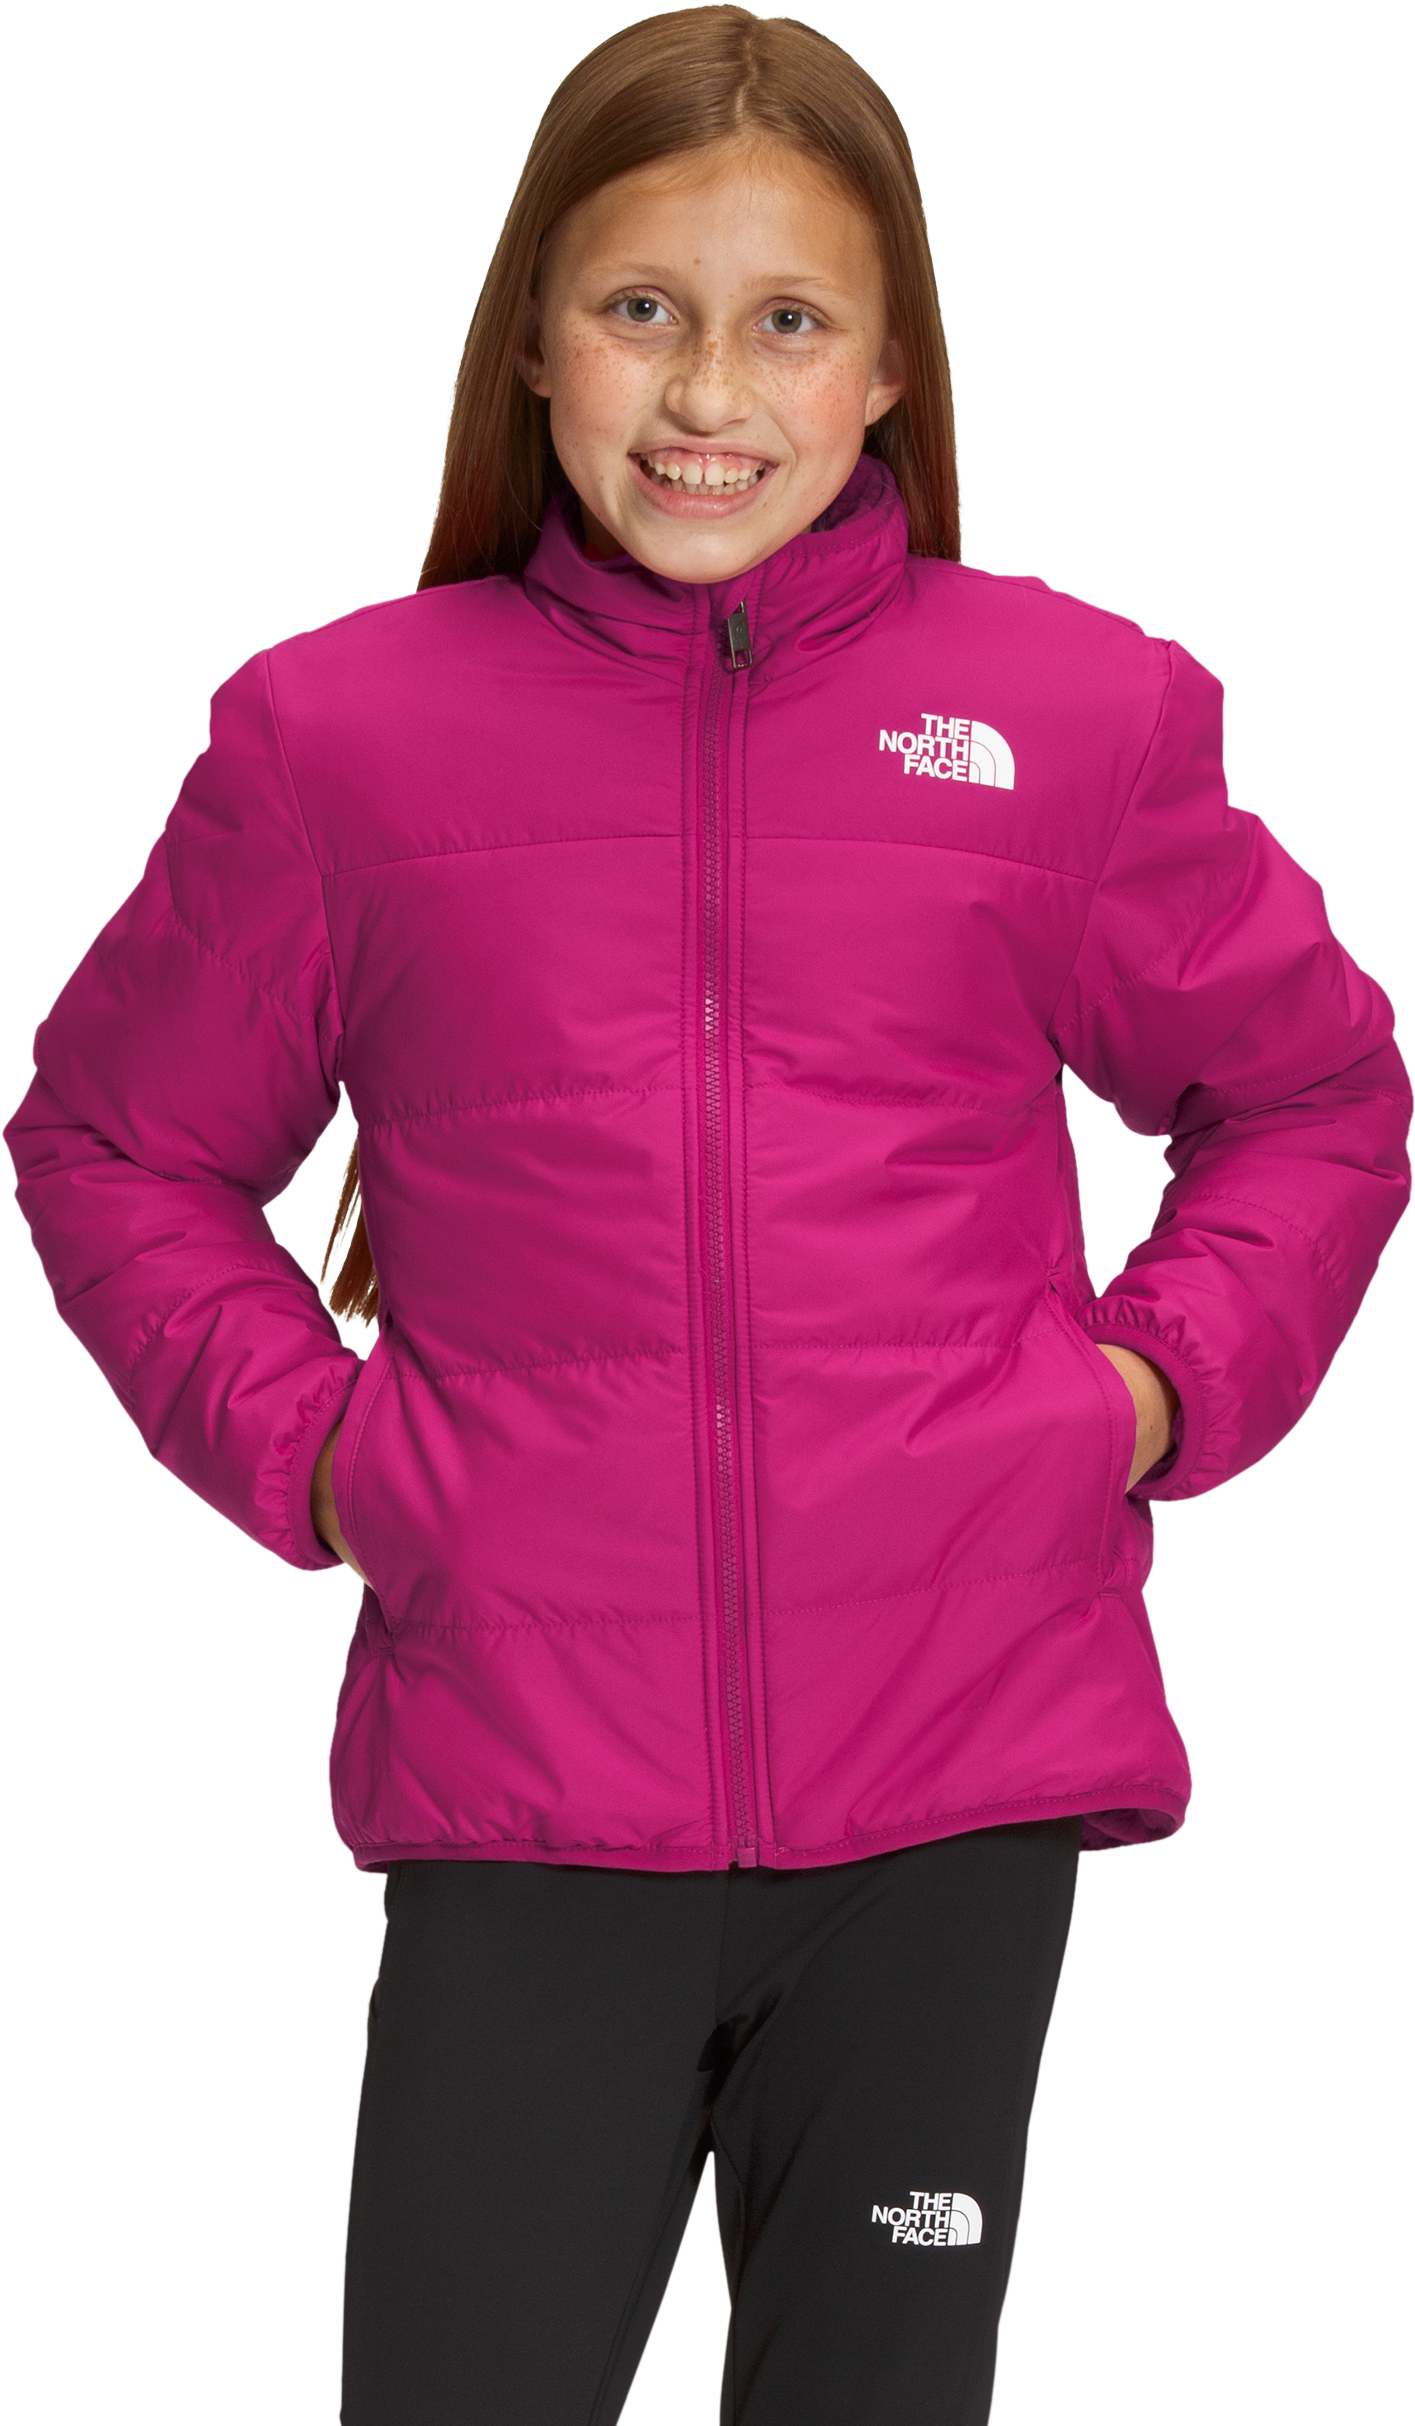 The North Face Mossbud Reversible Jacket for Girls | Cabela's